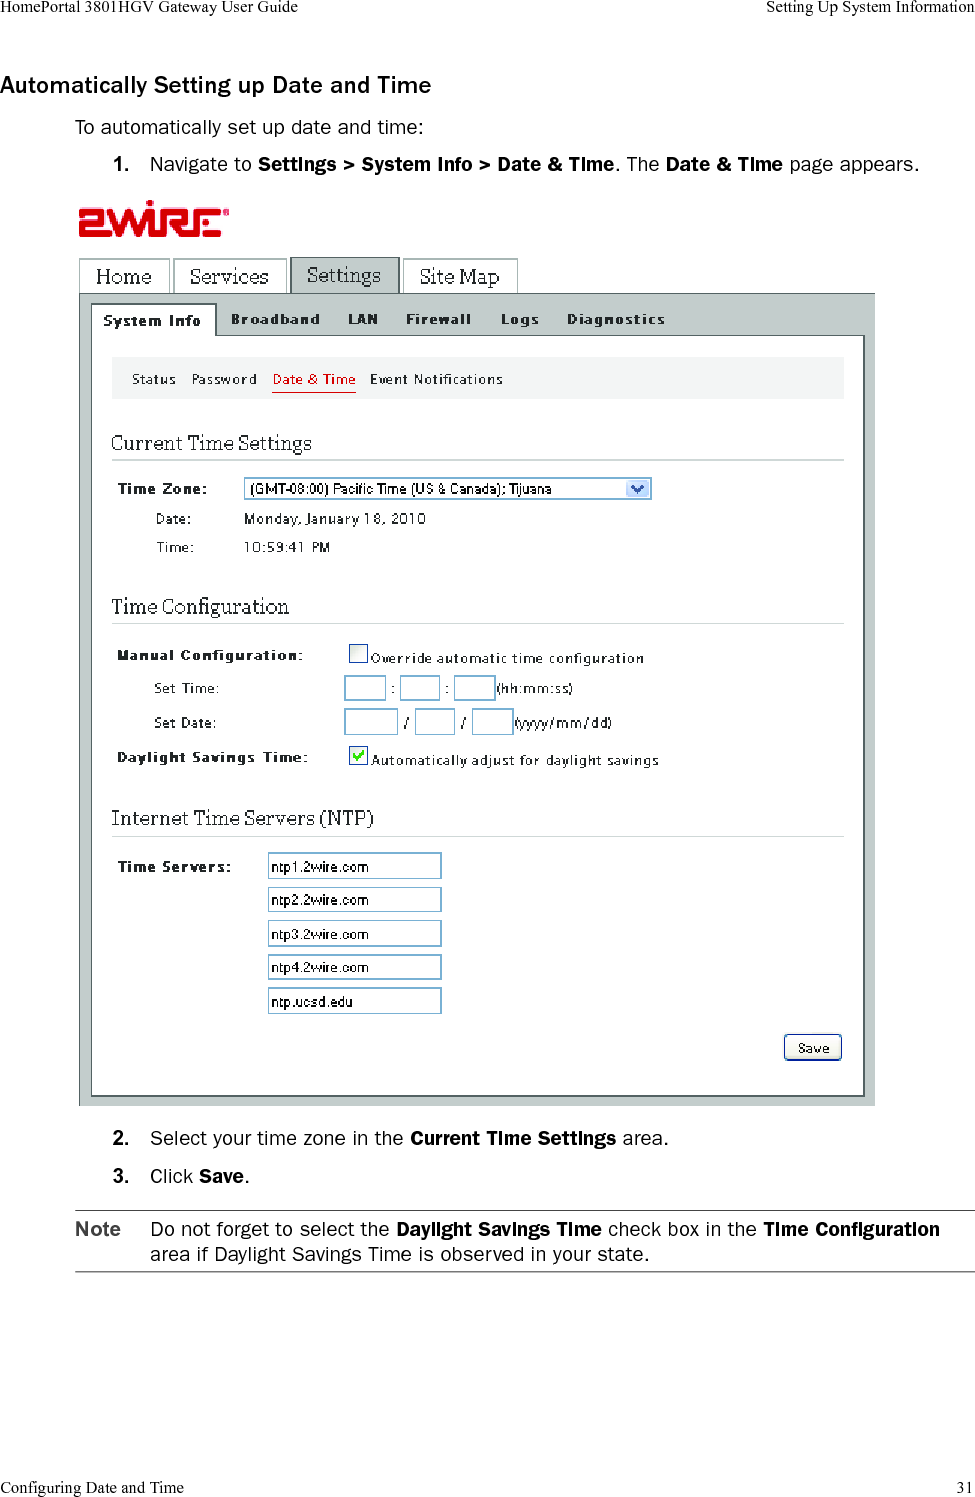 Configuring Date and Time 31HomePortal 3801HGV Gateway User Guide Setting Up System InformationAutomatically Setting up Date and TimeTo automatically set up date and time:1. Navigate to Settings &gt; System Info &gt; Date &amp; Time. The Date &amp; Time page appears.2. Select your time zone in the Current Time Settings area.3. Click Save.Note Do not forget to select the Daylight Savings Time check box in the Time Configuration area if Daylight Savings Time is observed in your state.